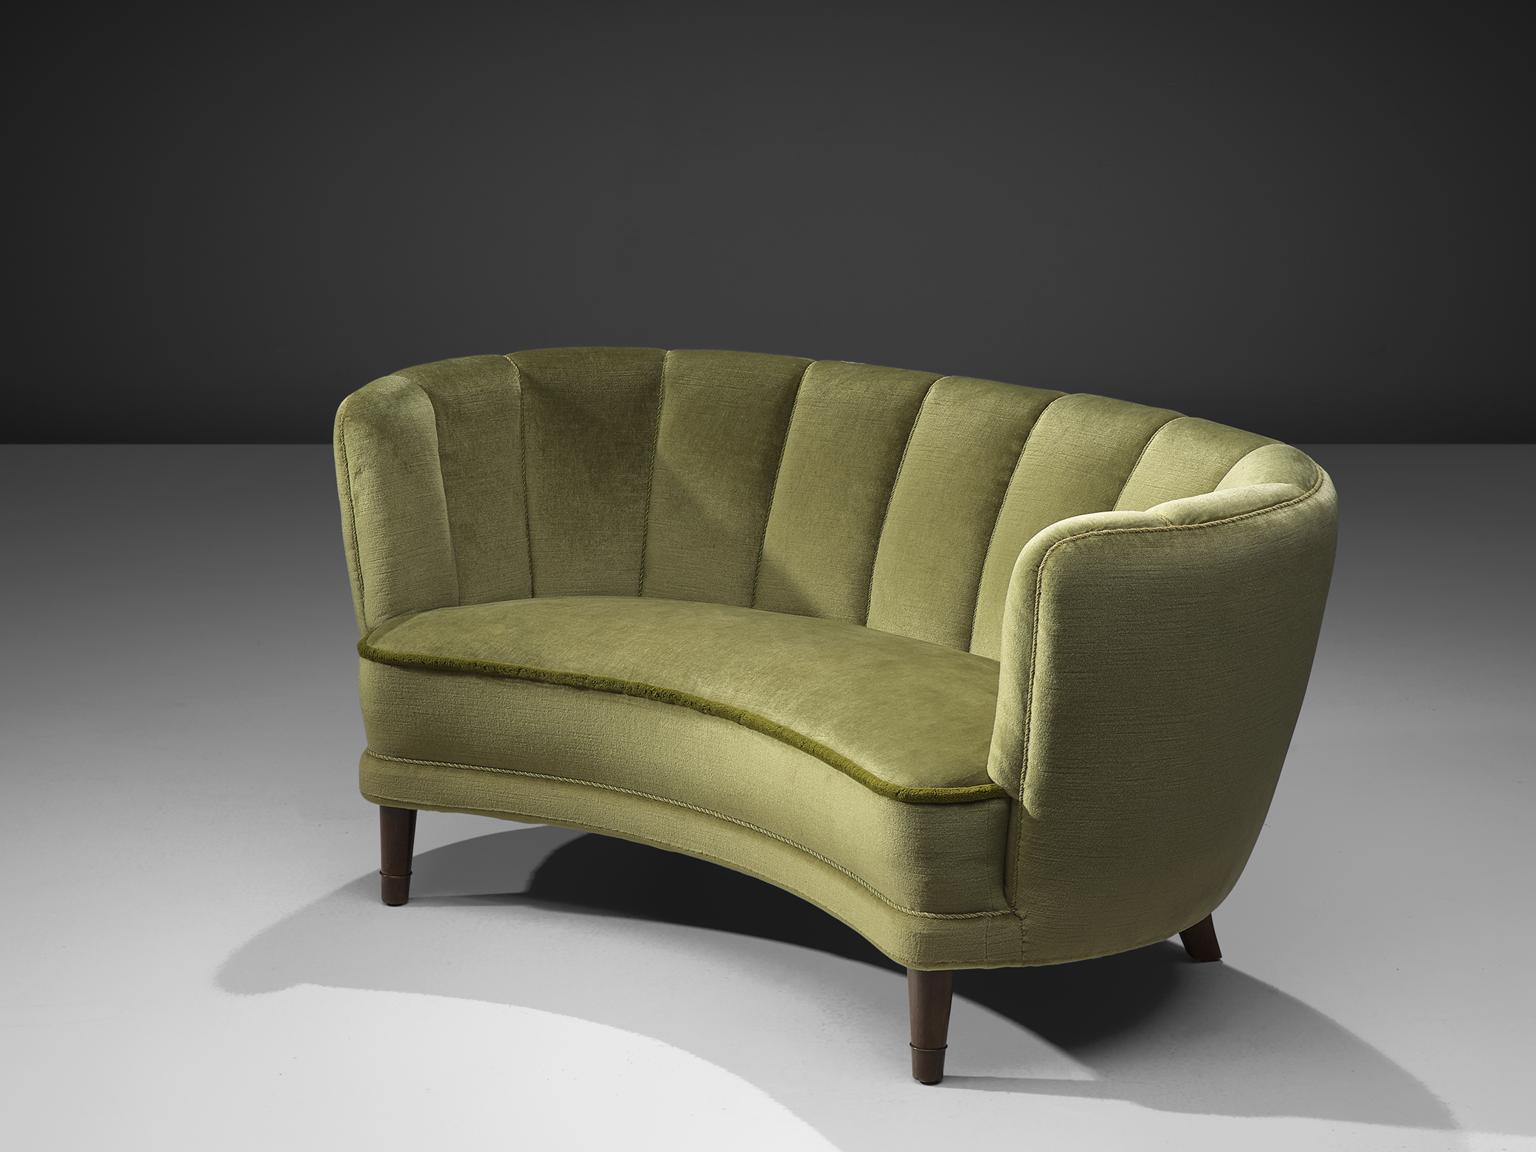 Sofa, green velvet and oak, France, 1950s

This voluptuous sofa is executed with wooden legs and shimmering green colored velvet fabric. The sofa has a high webbed, curved back and a thick body, both the back that flow into the armrests is bulky